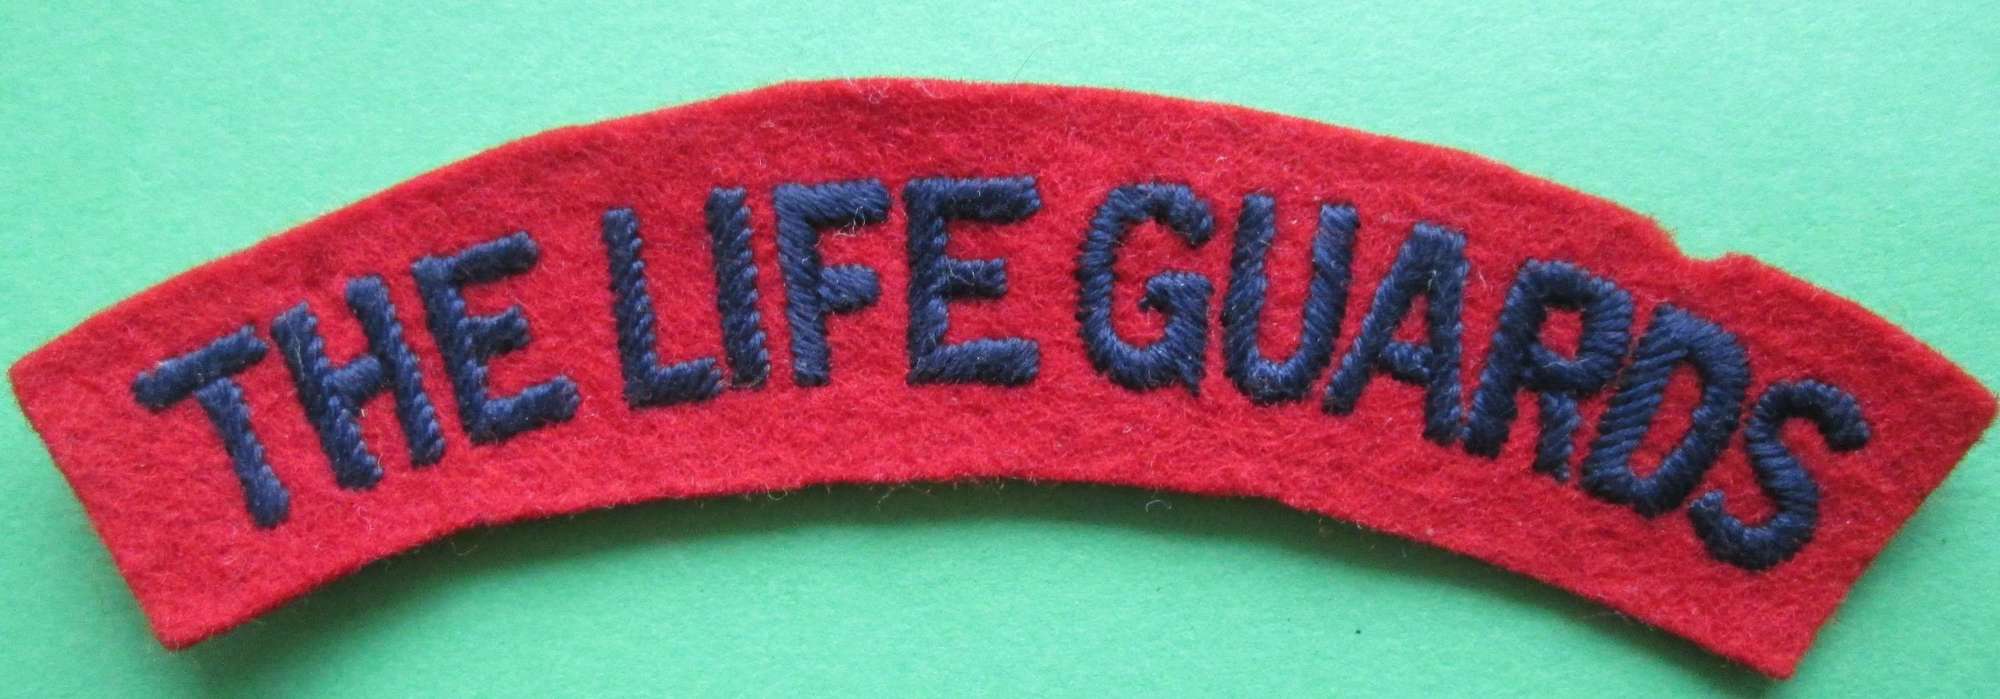 SHOULDER TITLE FOR THE LIFEGUARDS